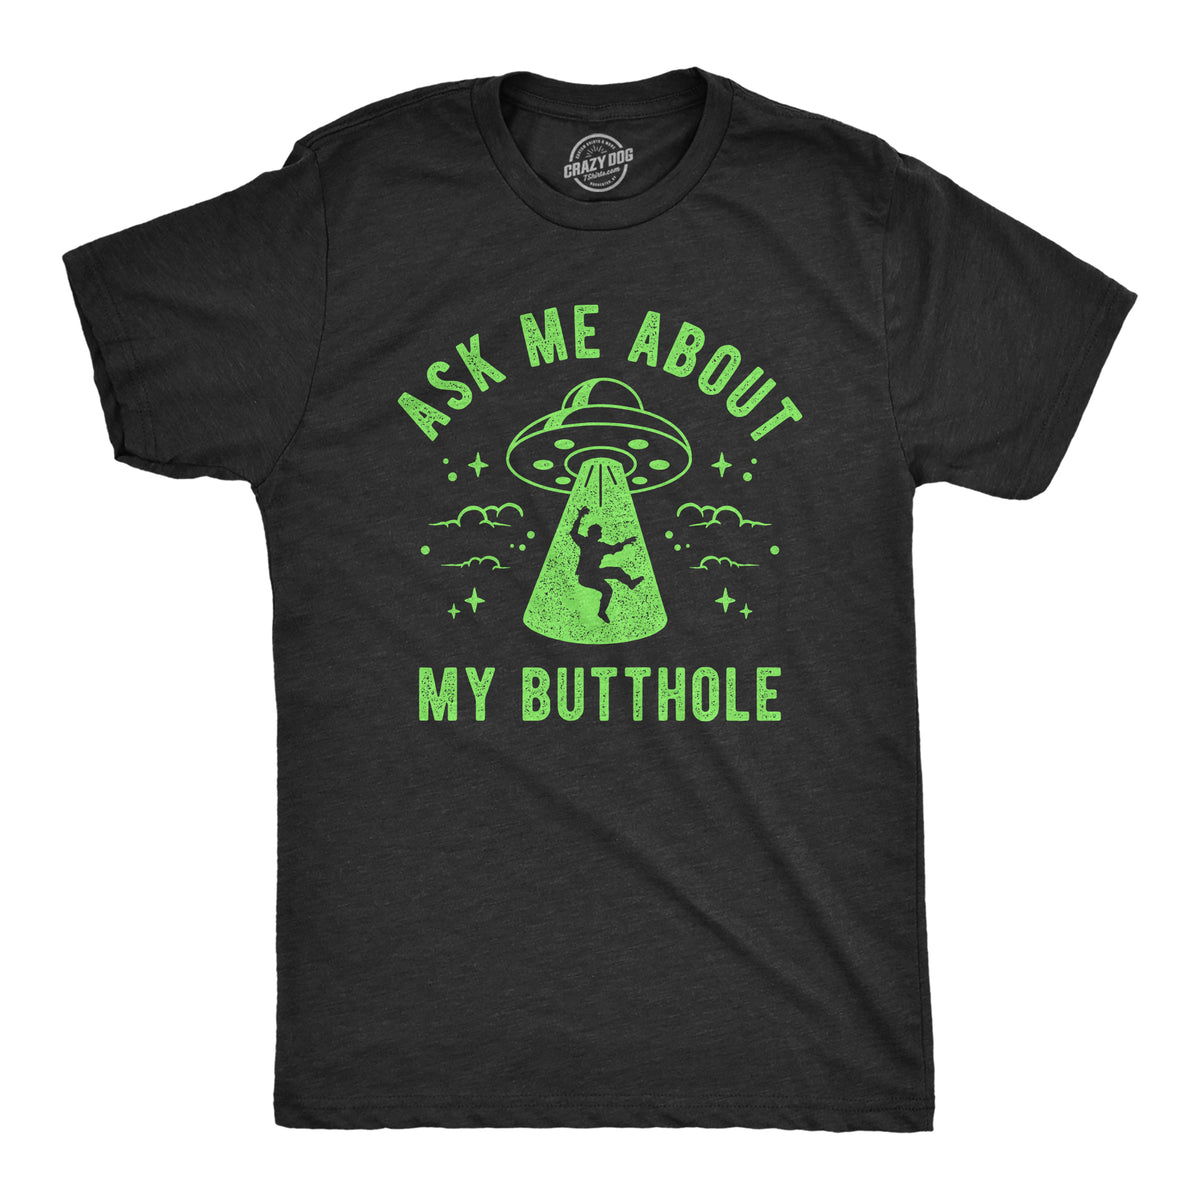 Funny Heather Black - ASKME Ask Me About My Butthole Mens T Shirt Nerdy sarcastic Tee